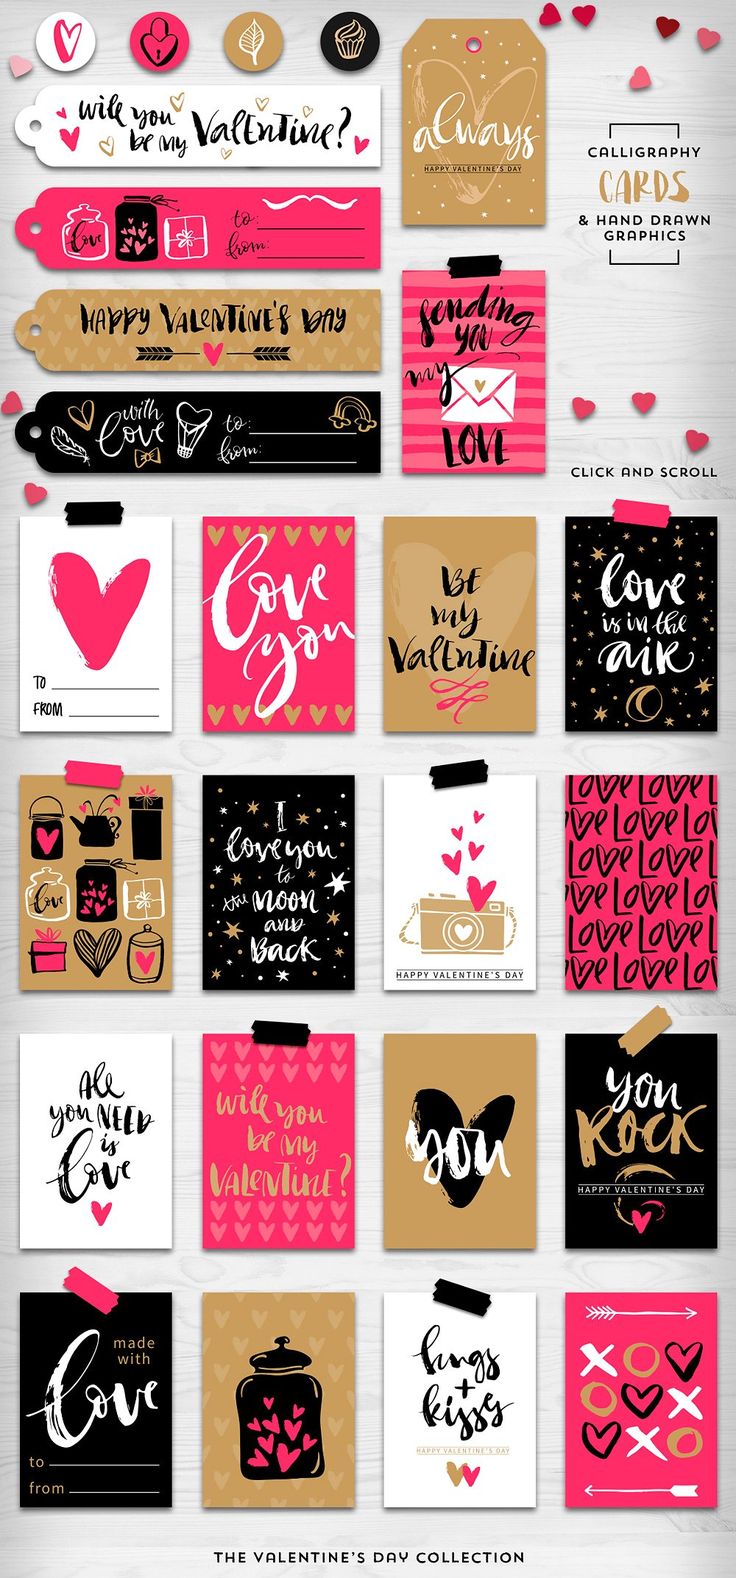 Valentine's day gift tags & overlays by kite-kit on @creativemarket